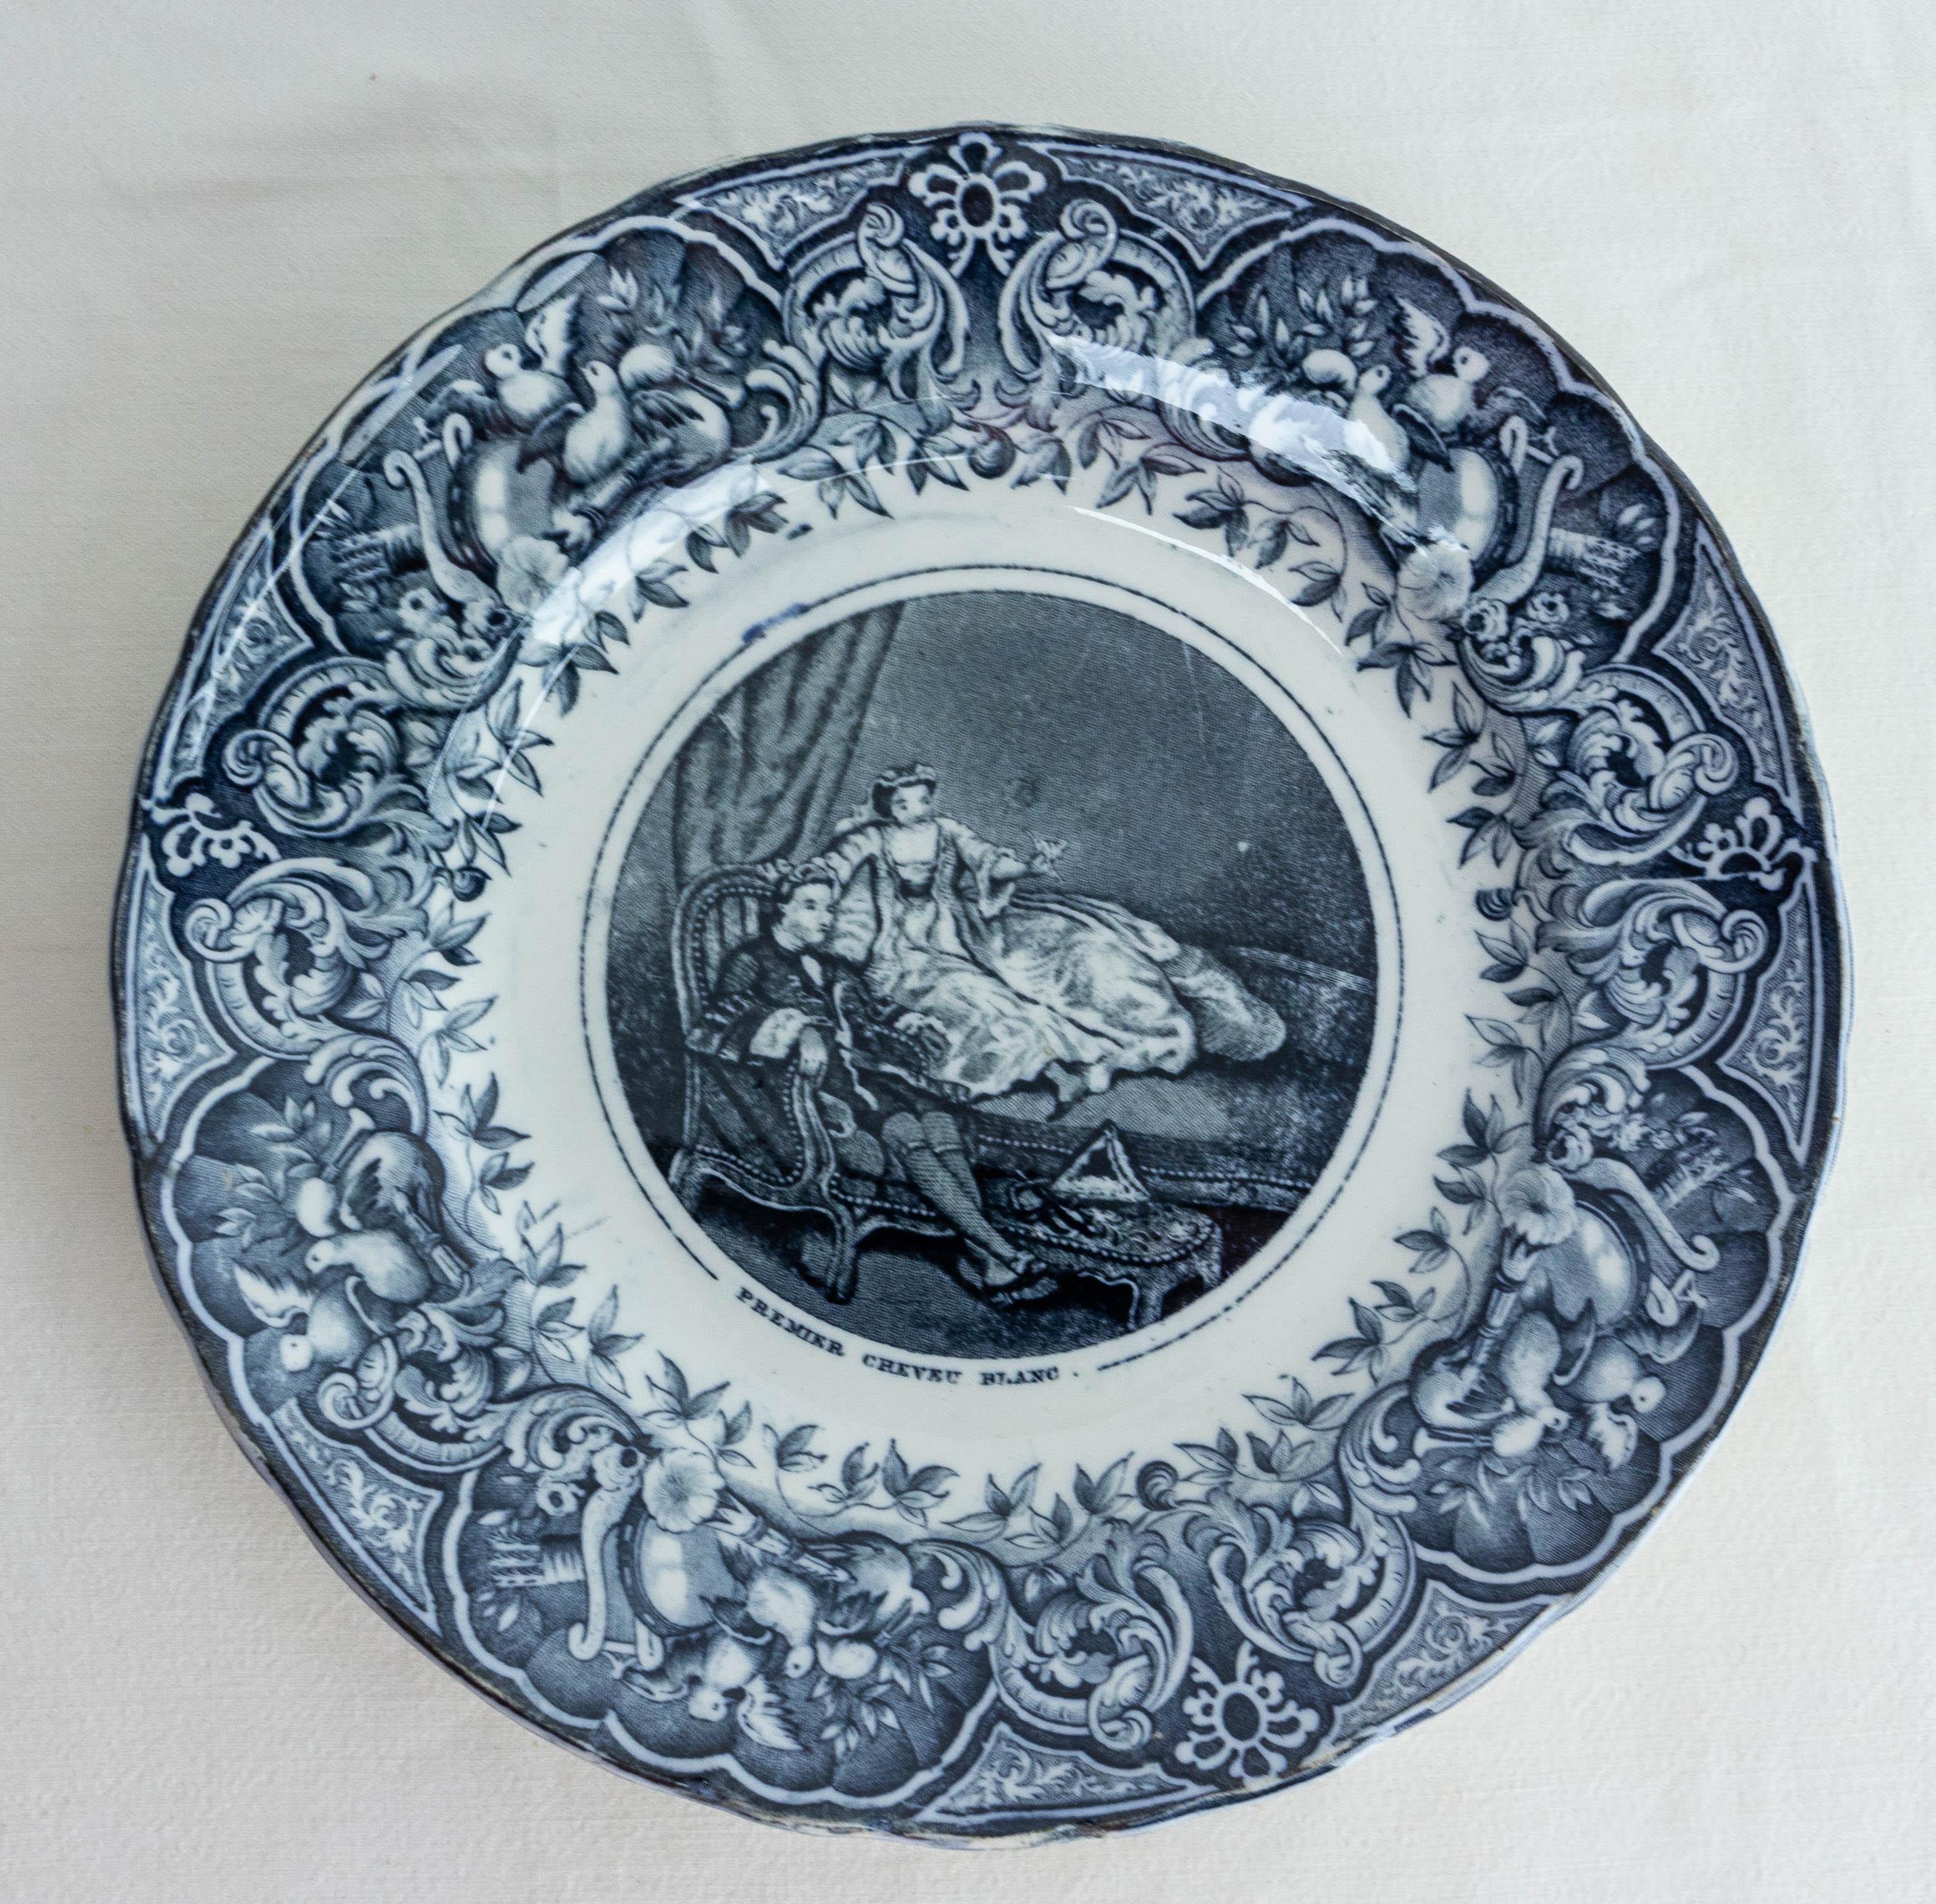 French set of faience plates, made in the manufacture of Jules Vieillard and Compagnie in the late 19th century.
This set of historiated plates retrace two moments in the life of a couple seen in a romantic way and humoristic way:
- the escape of